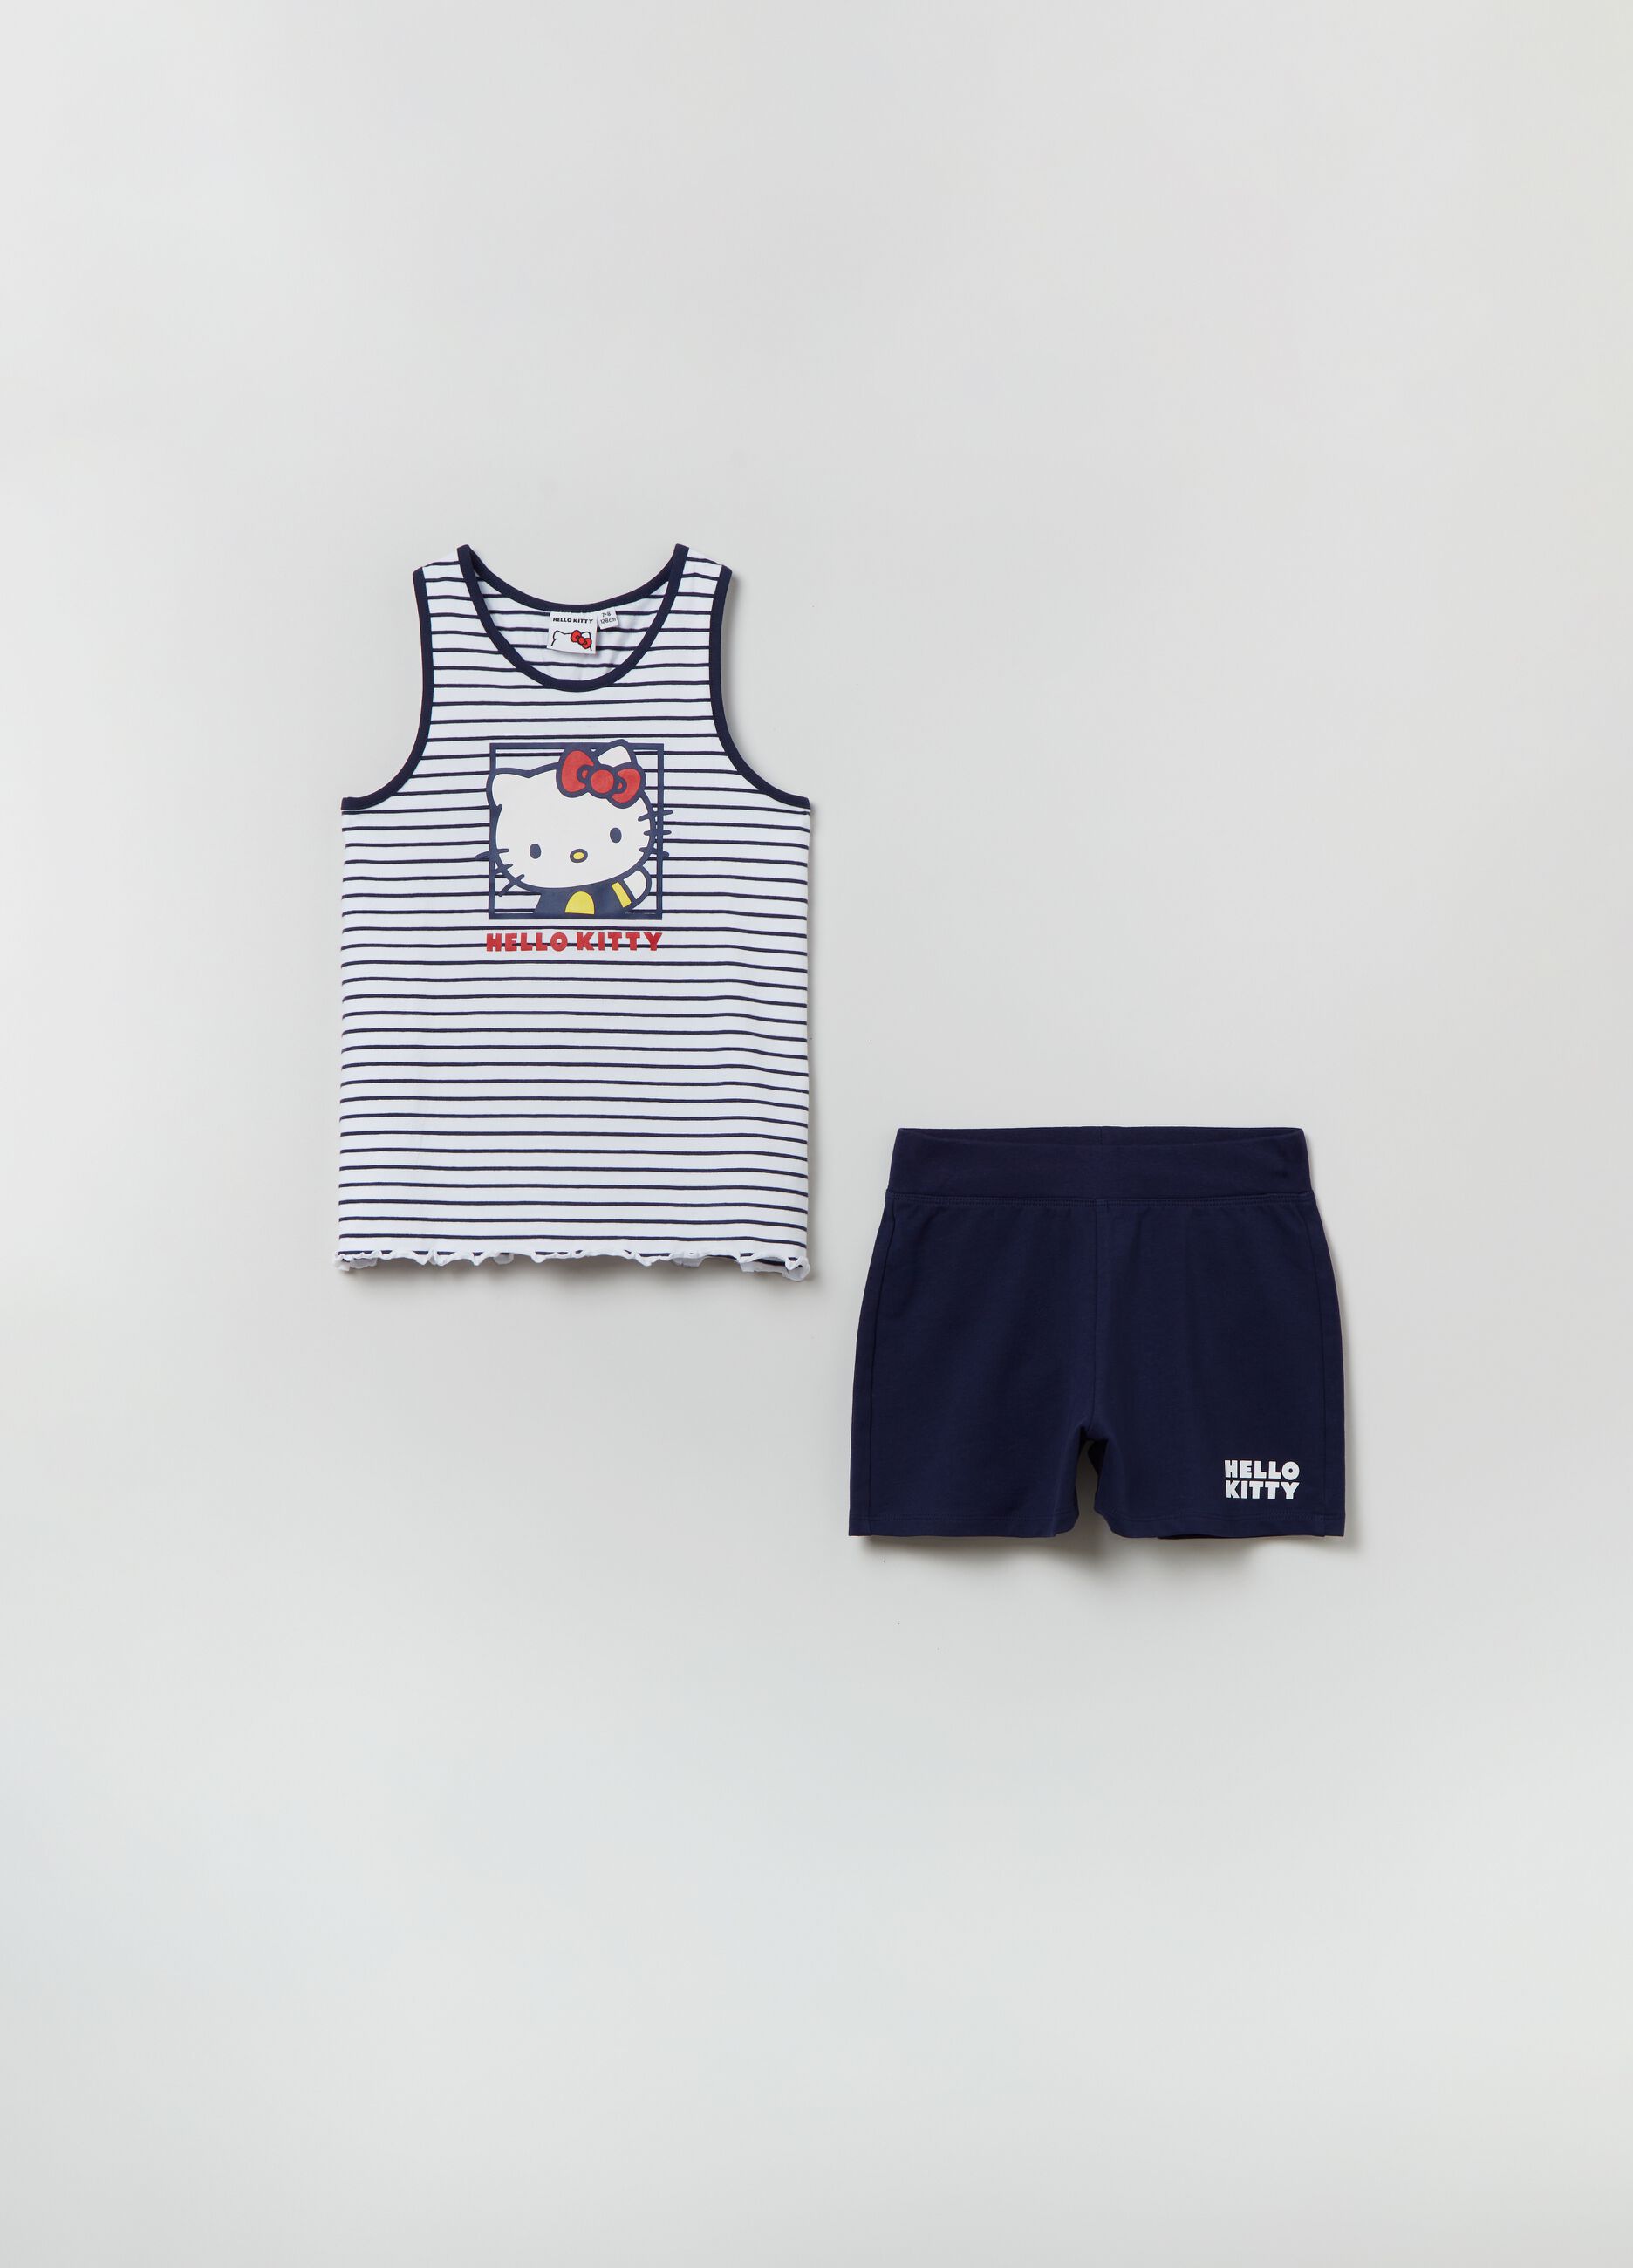 Striped tank top and Hello Kitty shorts set